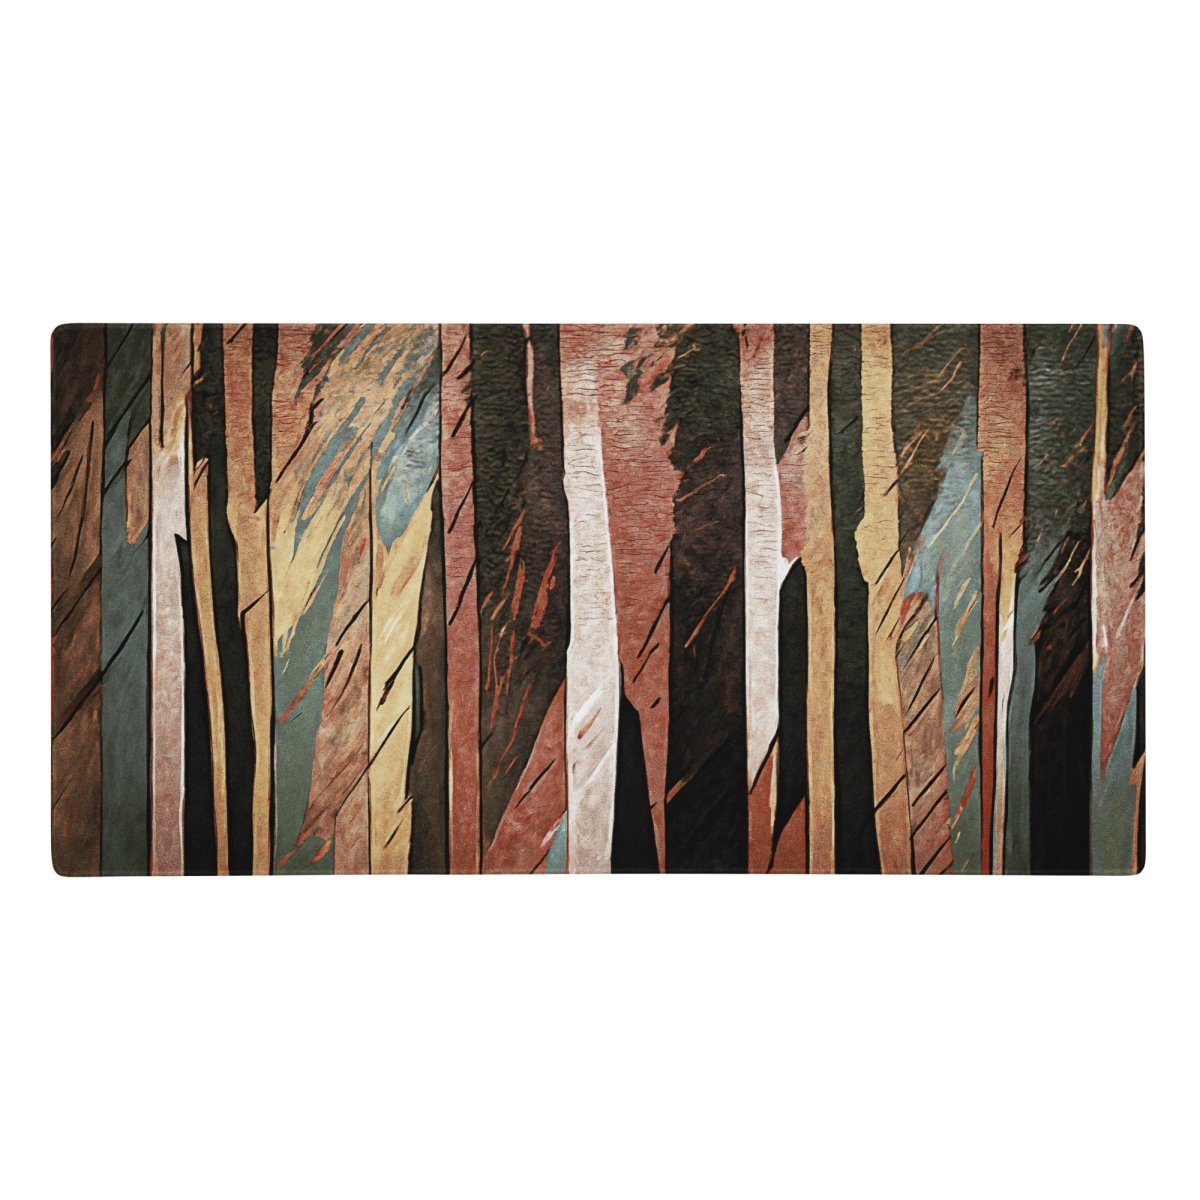 Feral columns - Gaming mouse pad - Ever colorful